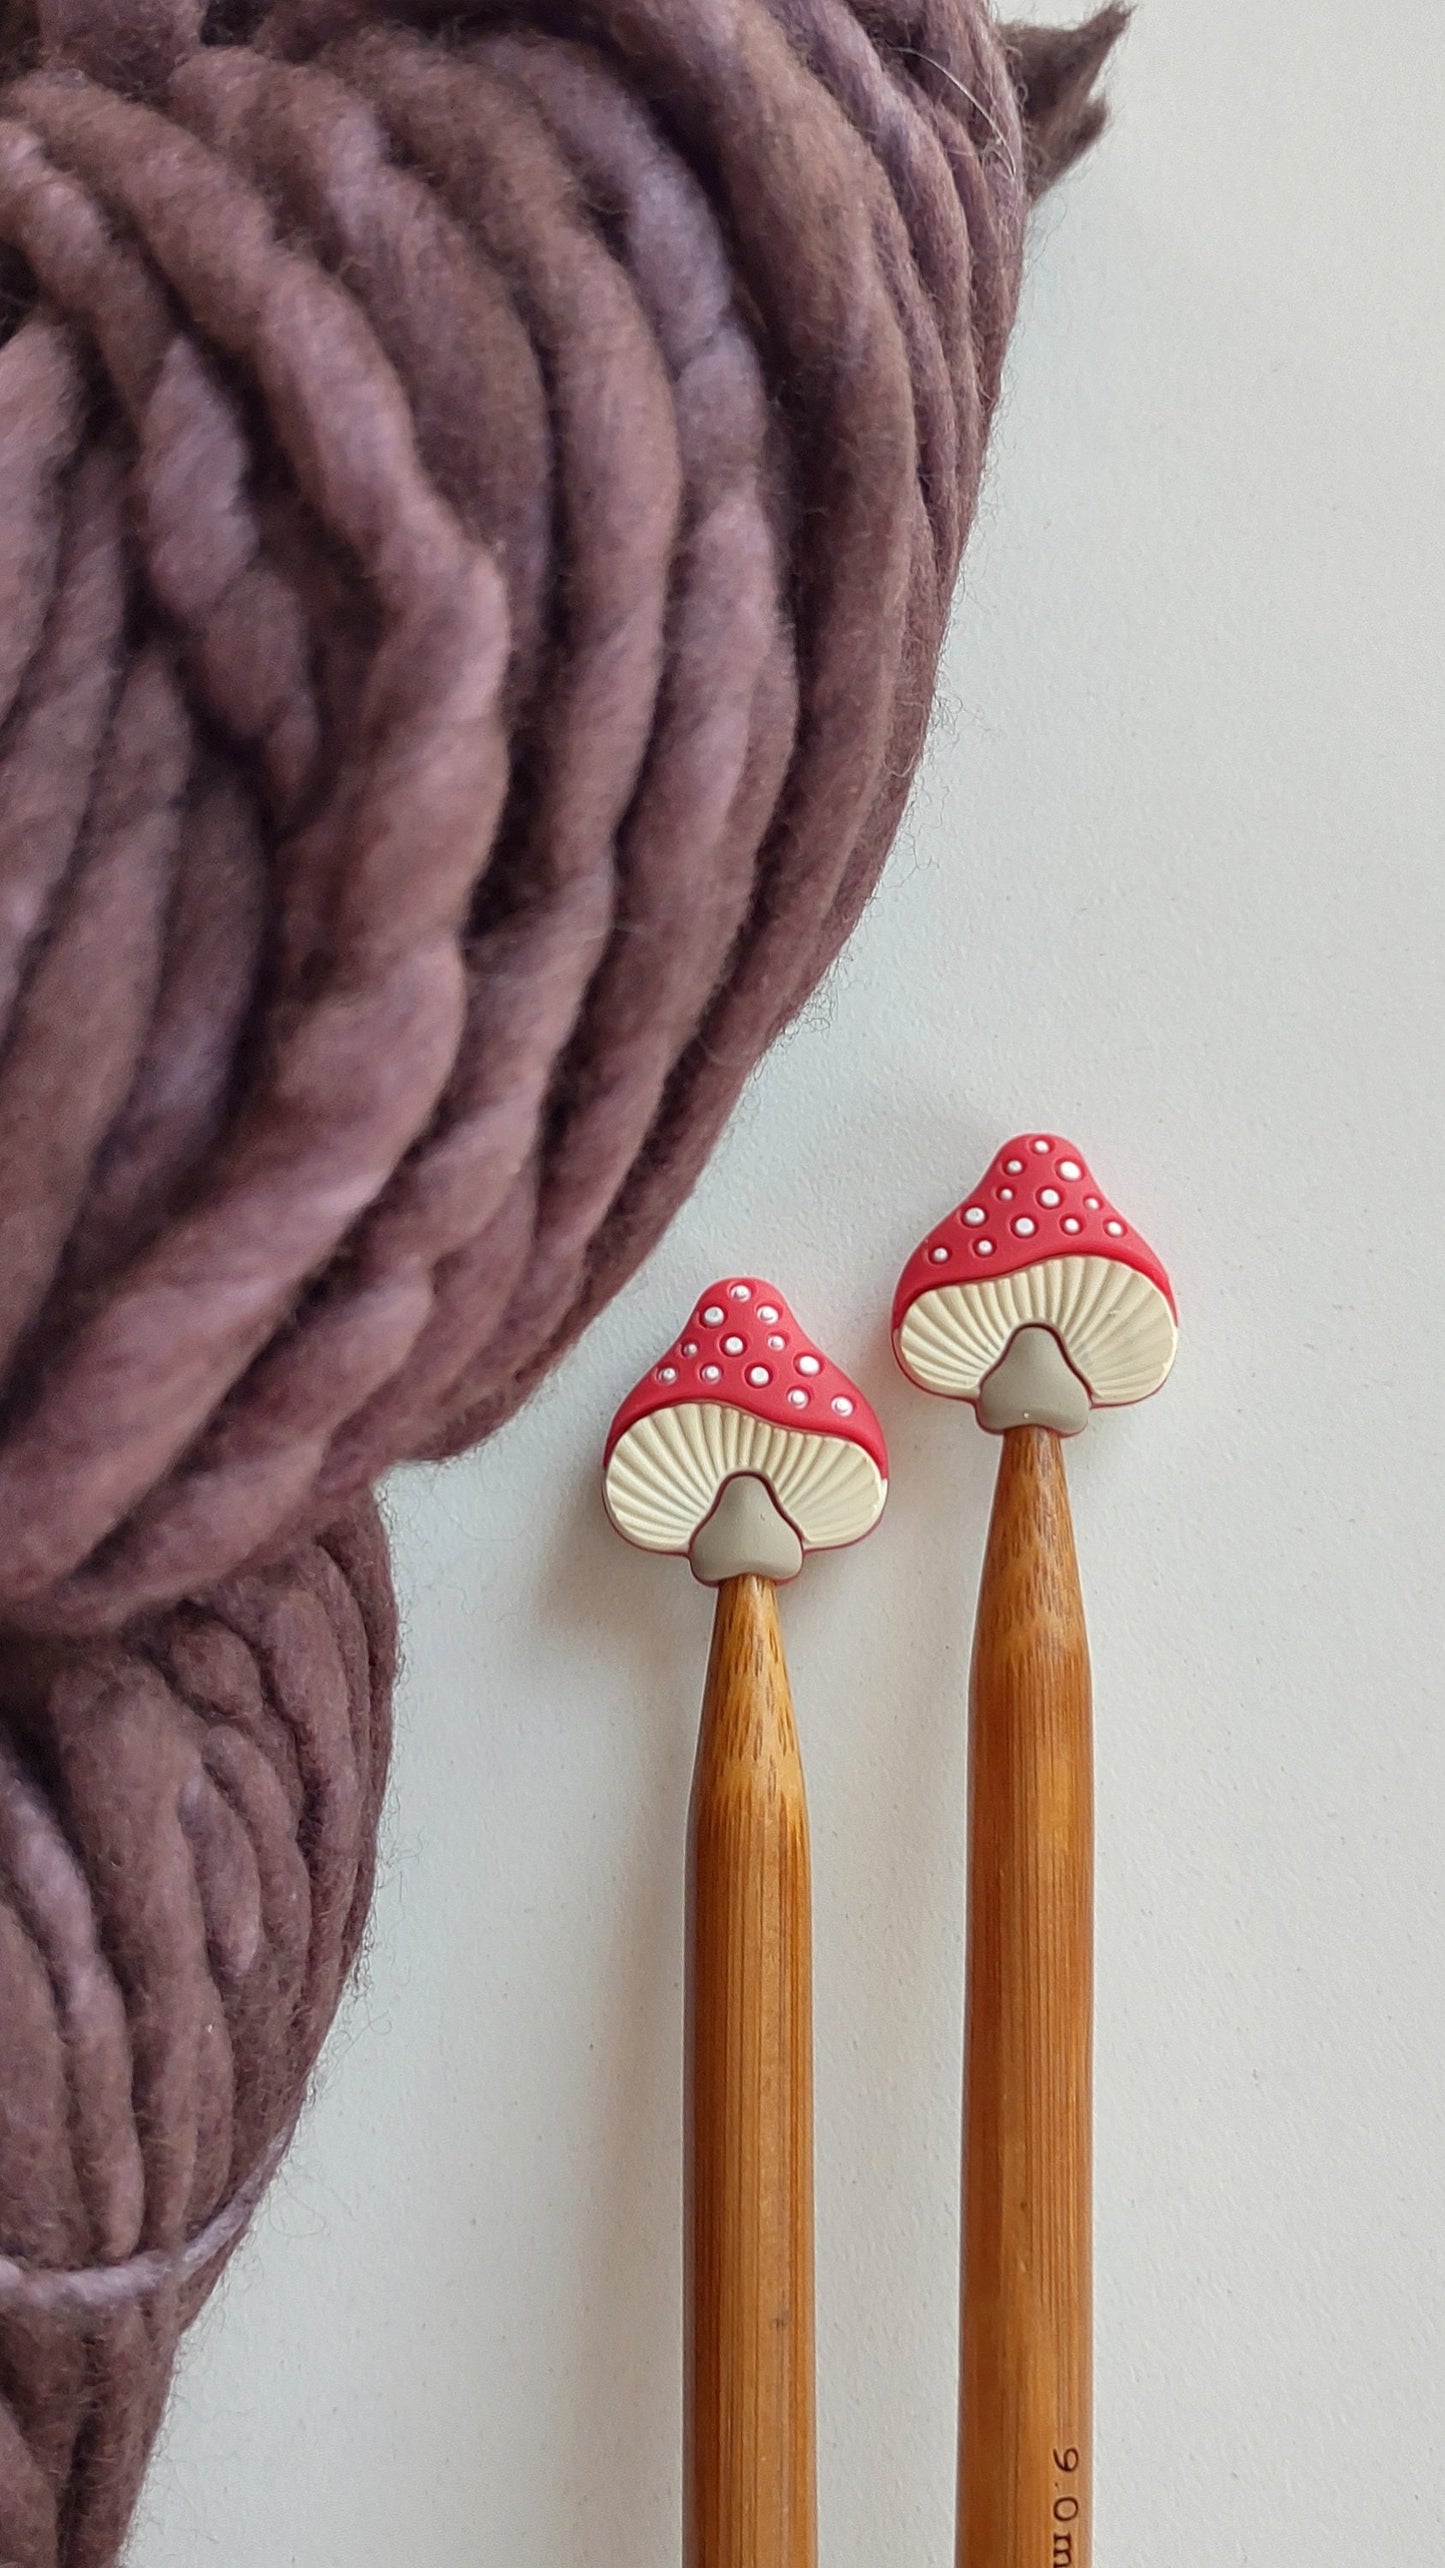 Red Mushroom Knitting Needle Stitch Stoppers. Needle Protectors. Knitting Needle Stoppers. Knitting Notions, Accessories, Supplies, Tools.